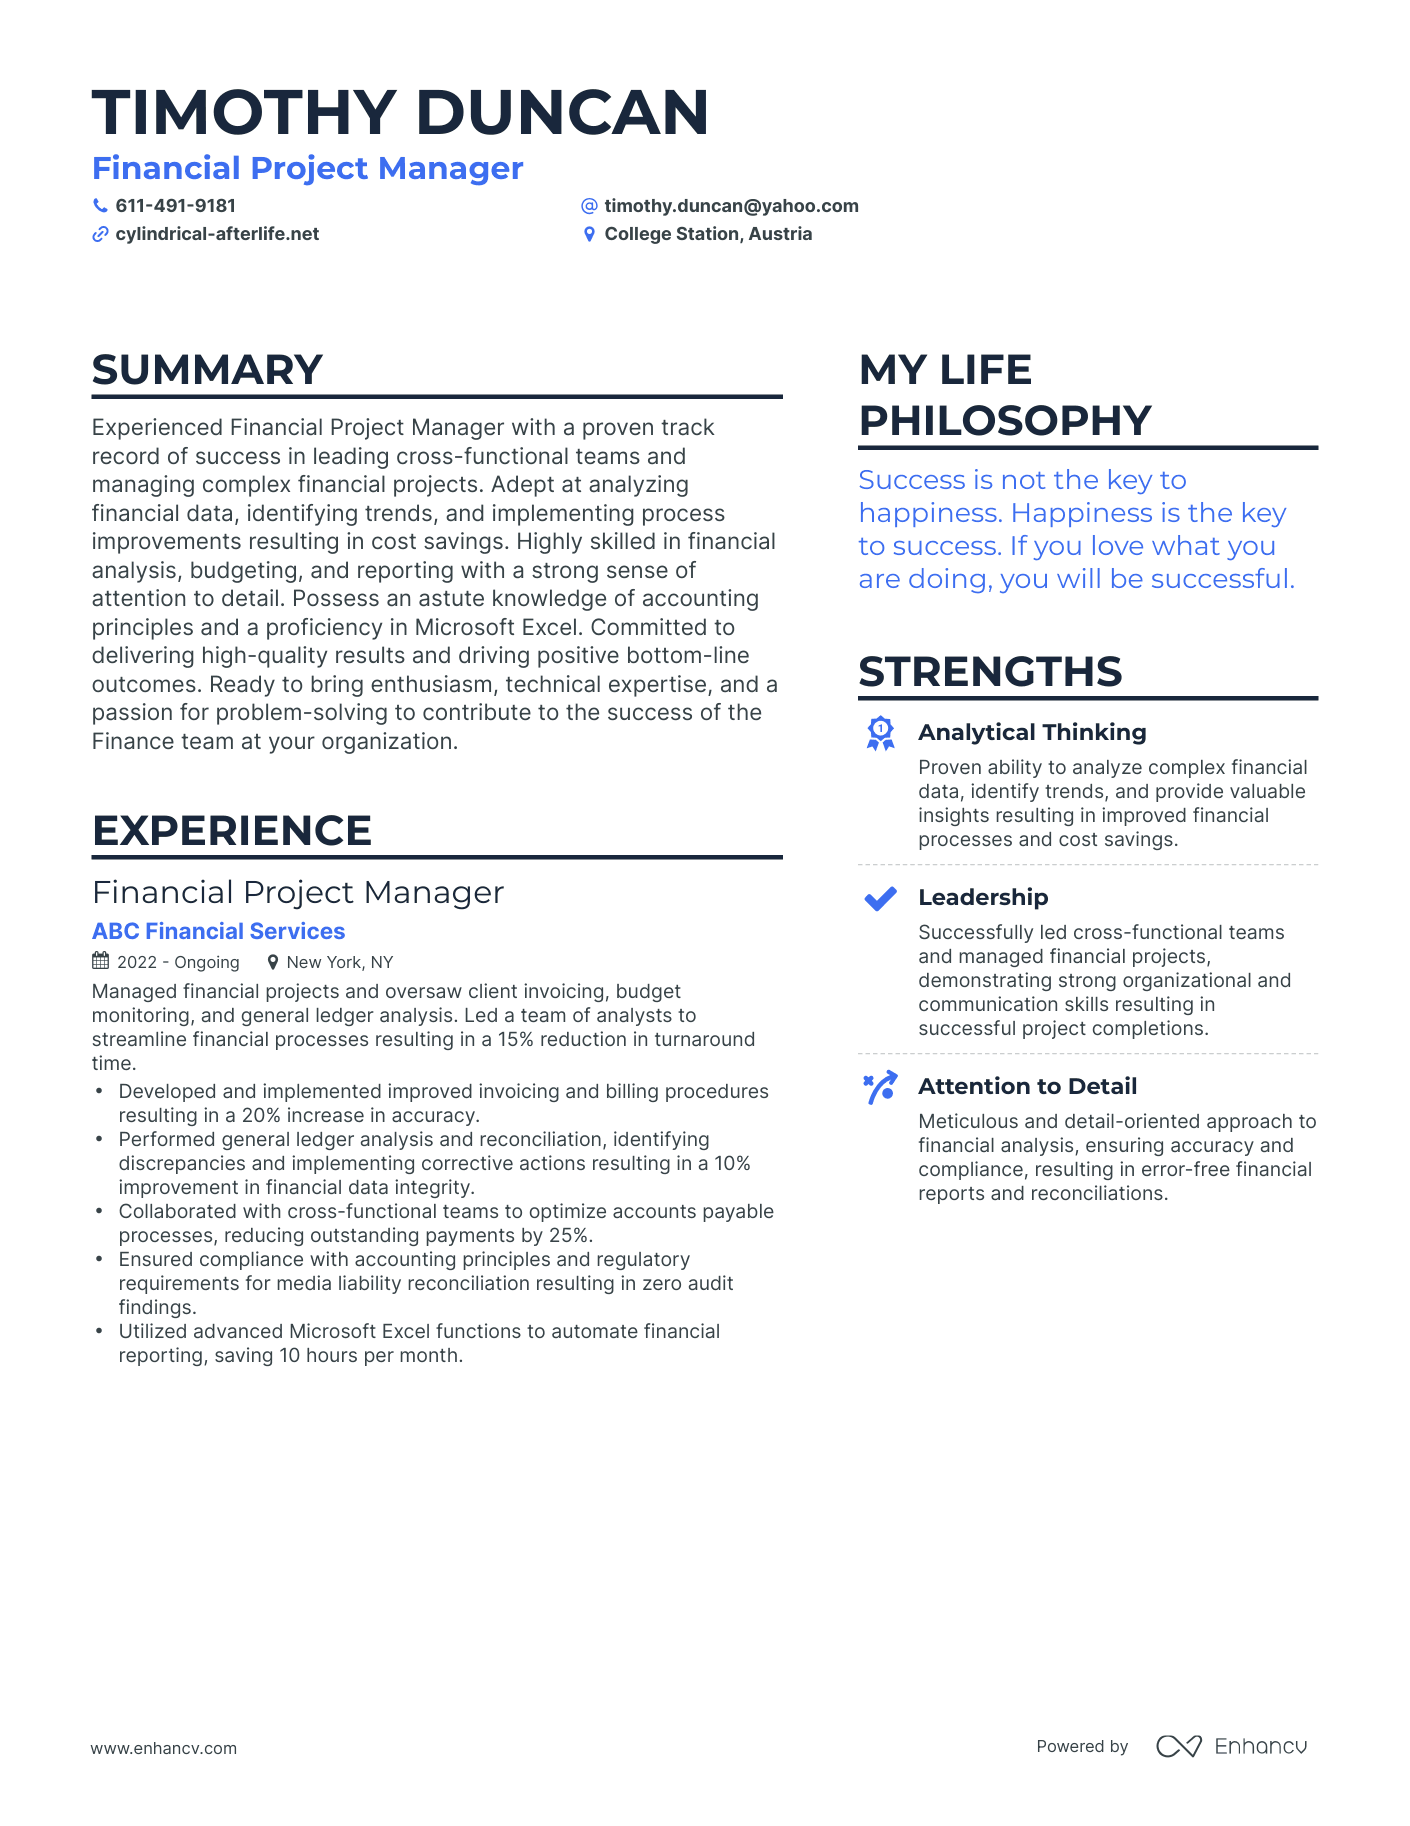 Financial Project Manager resume example